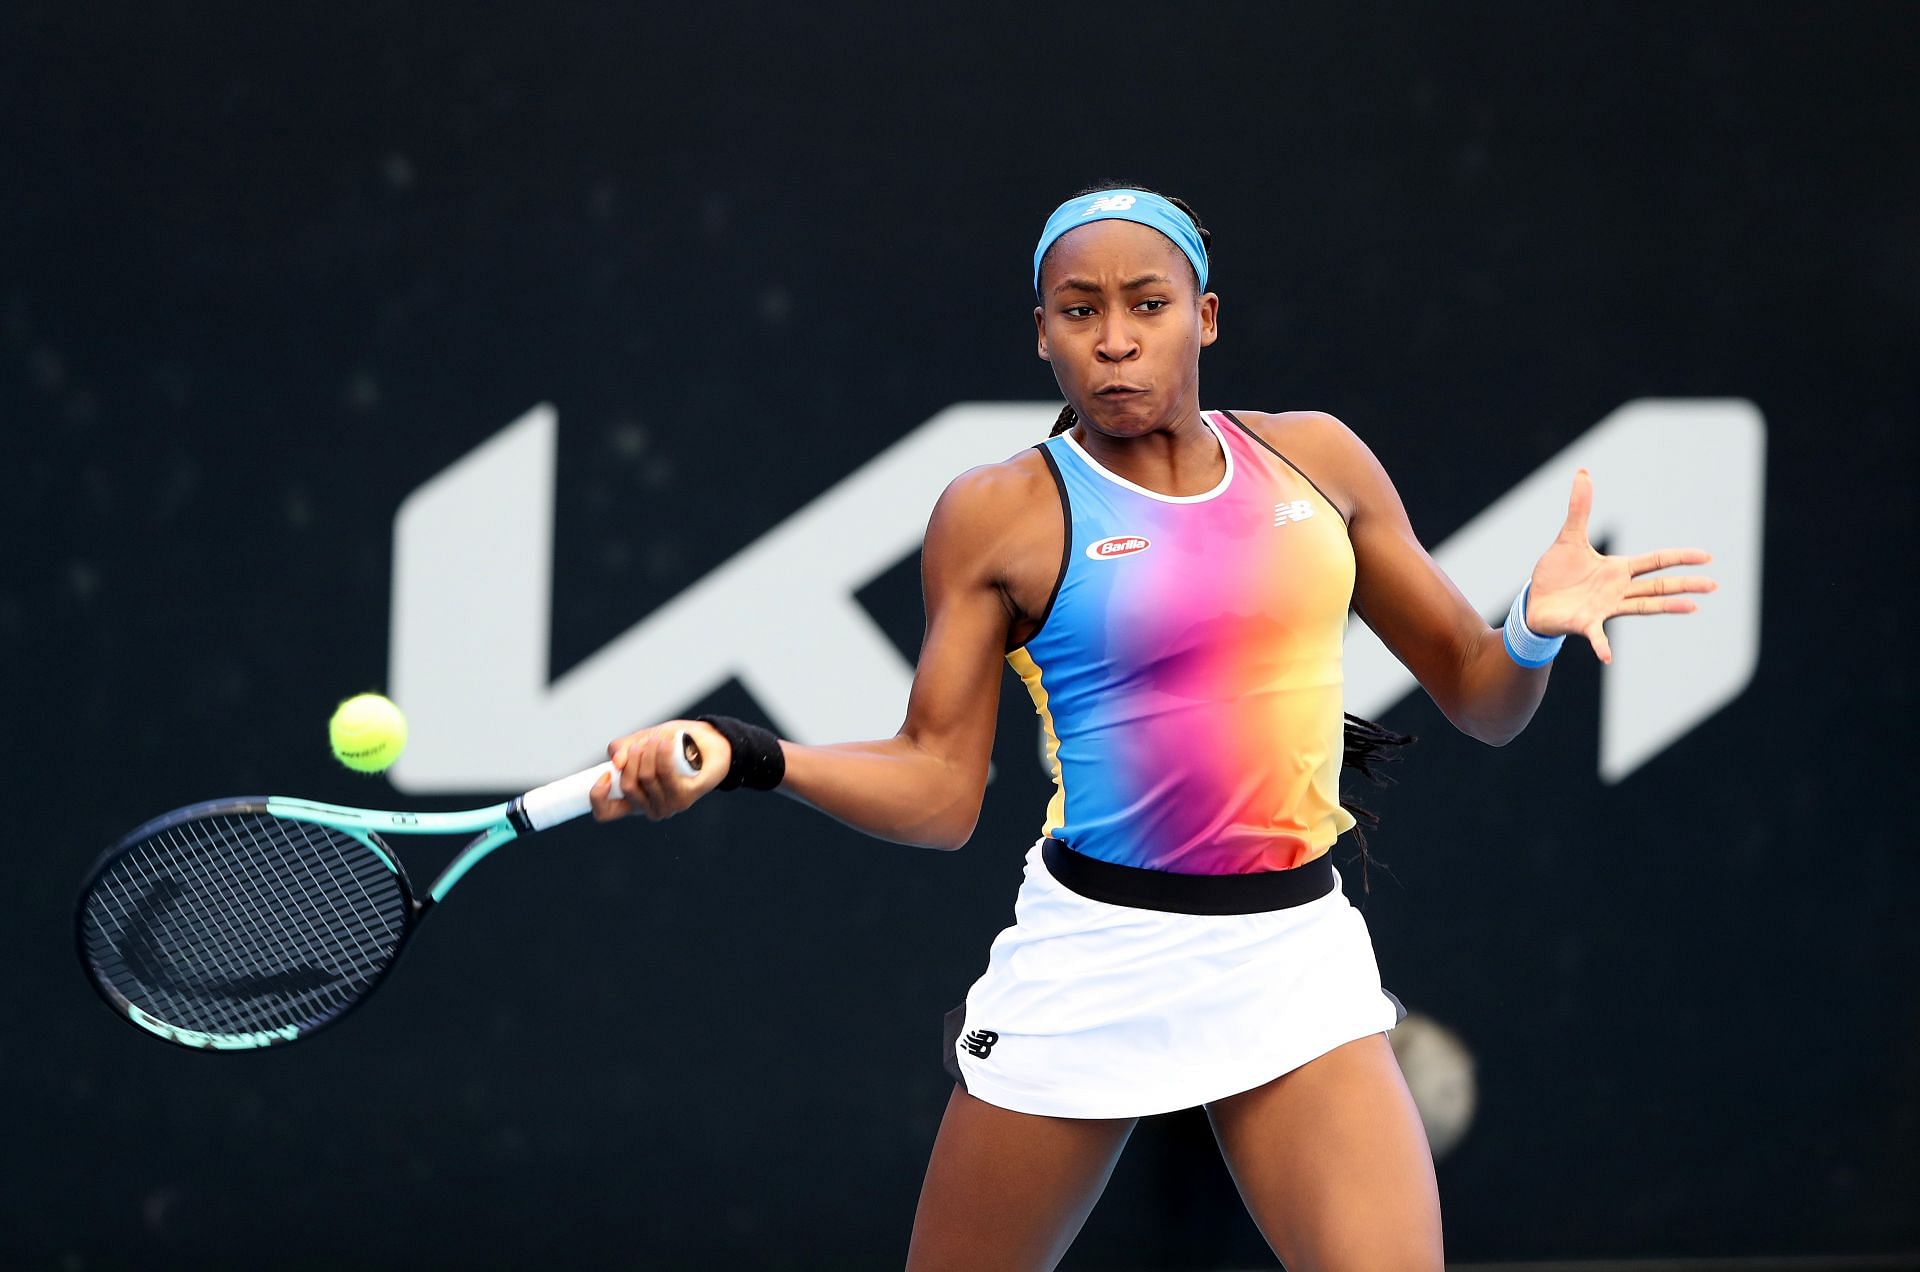 Coco Gauff in action at the 2022 Adelaide International 1